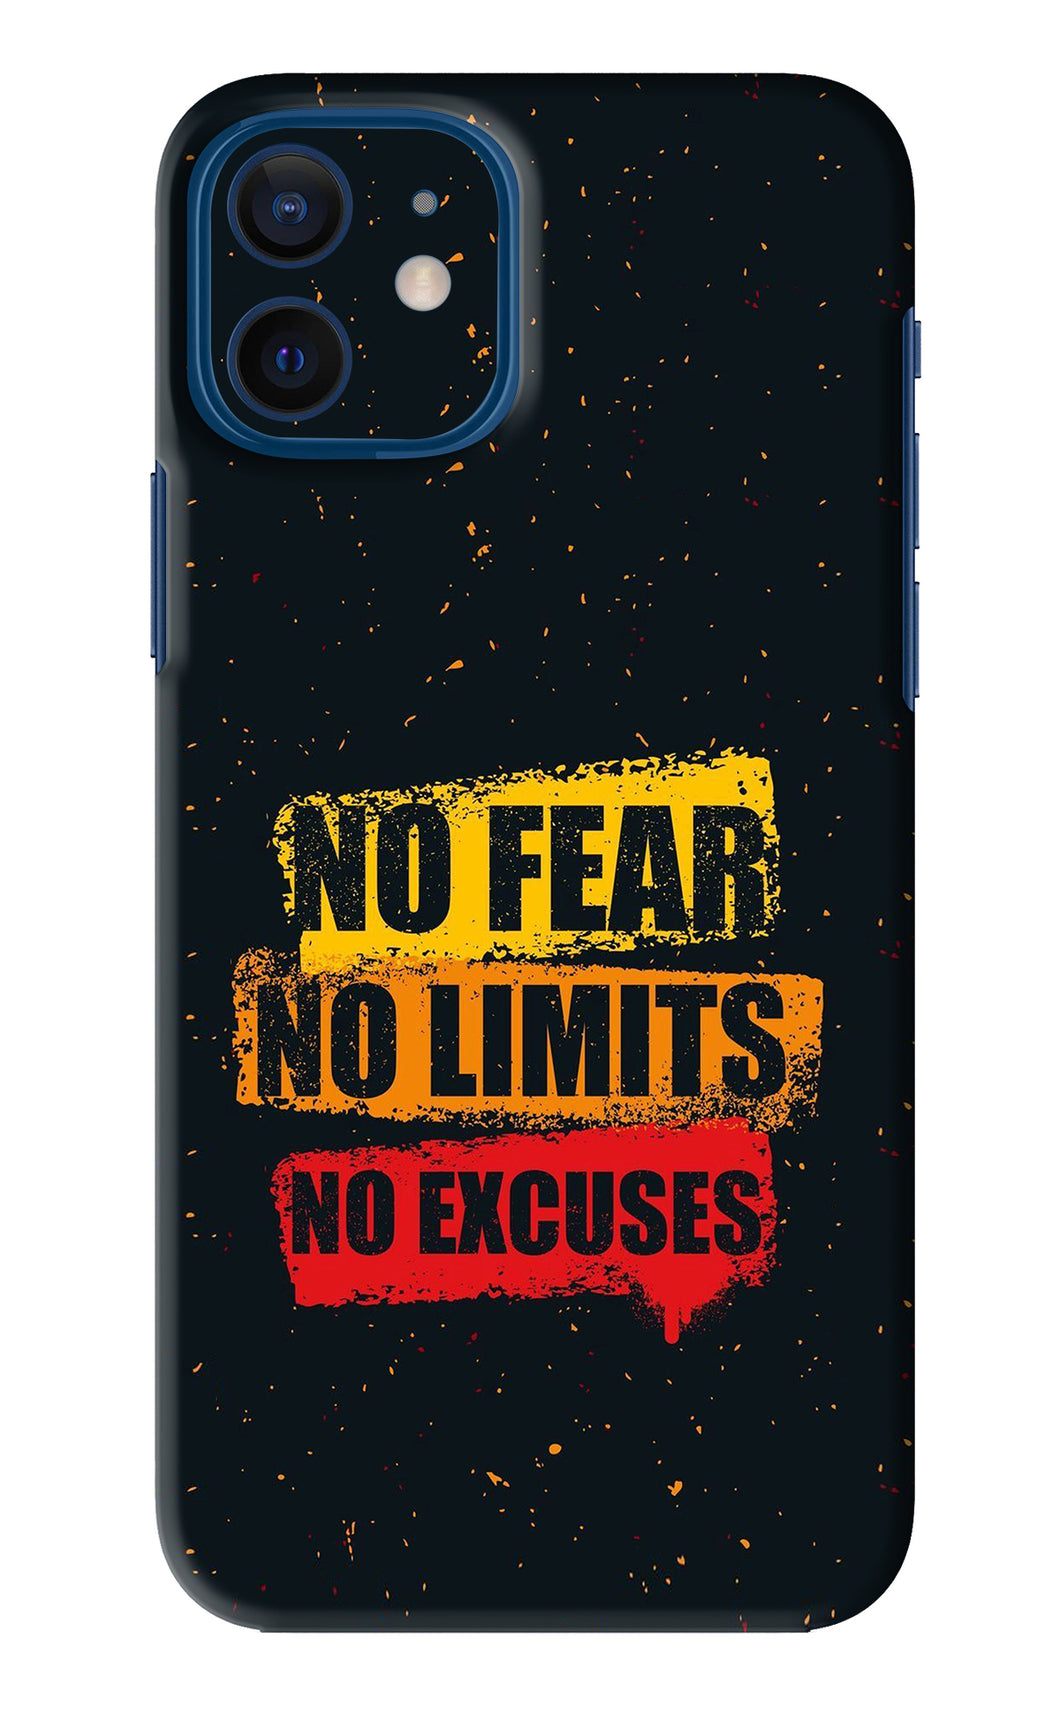 No Fear No Limits No Excuses iPhone 12 Back Skin Wrap